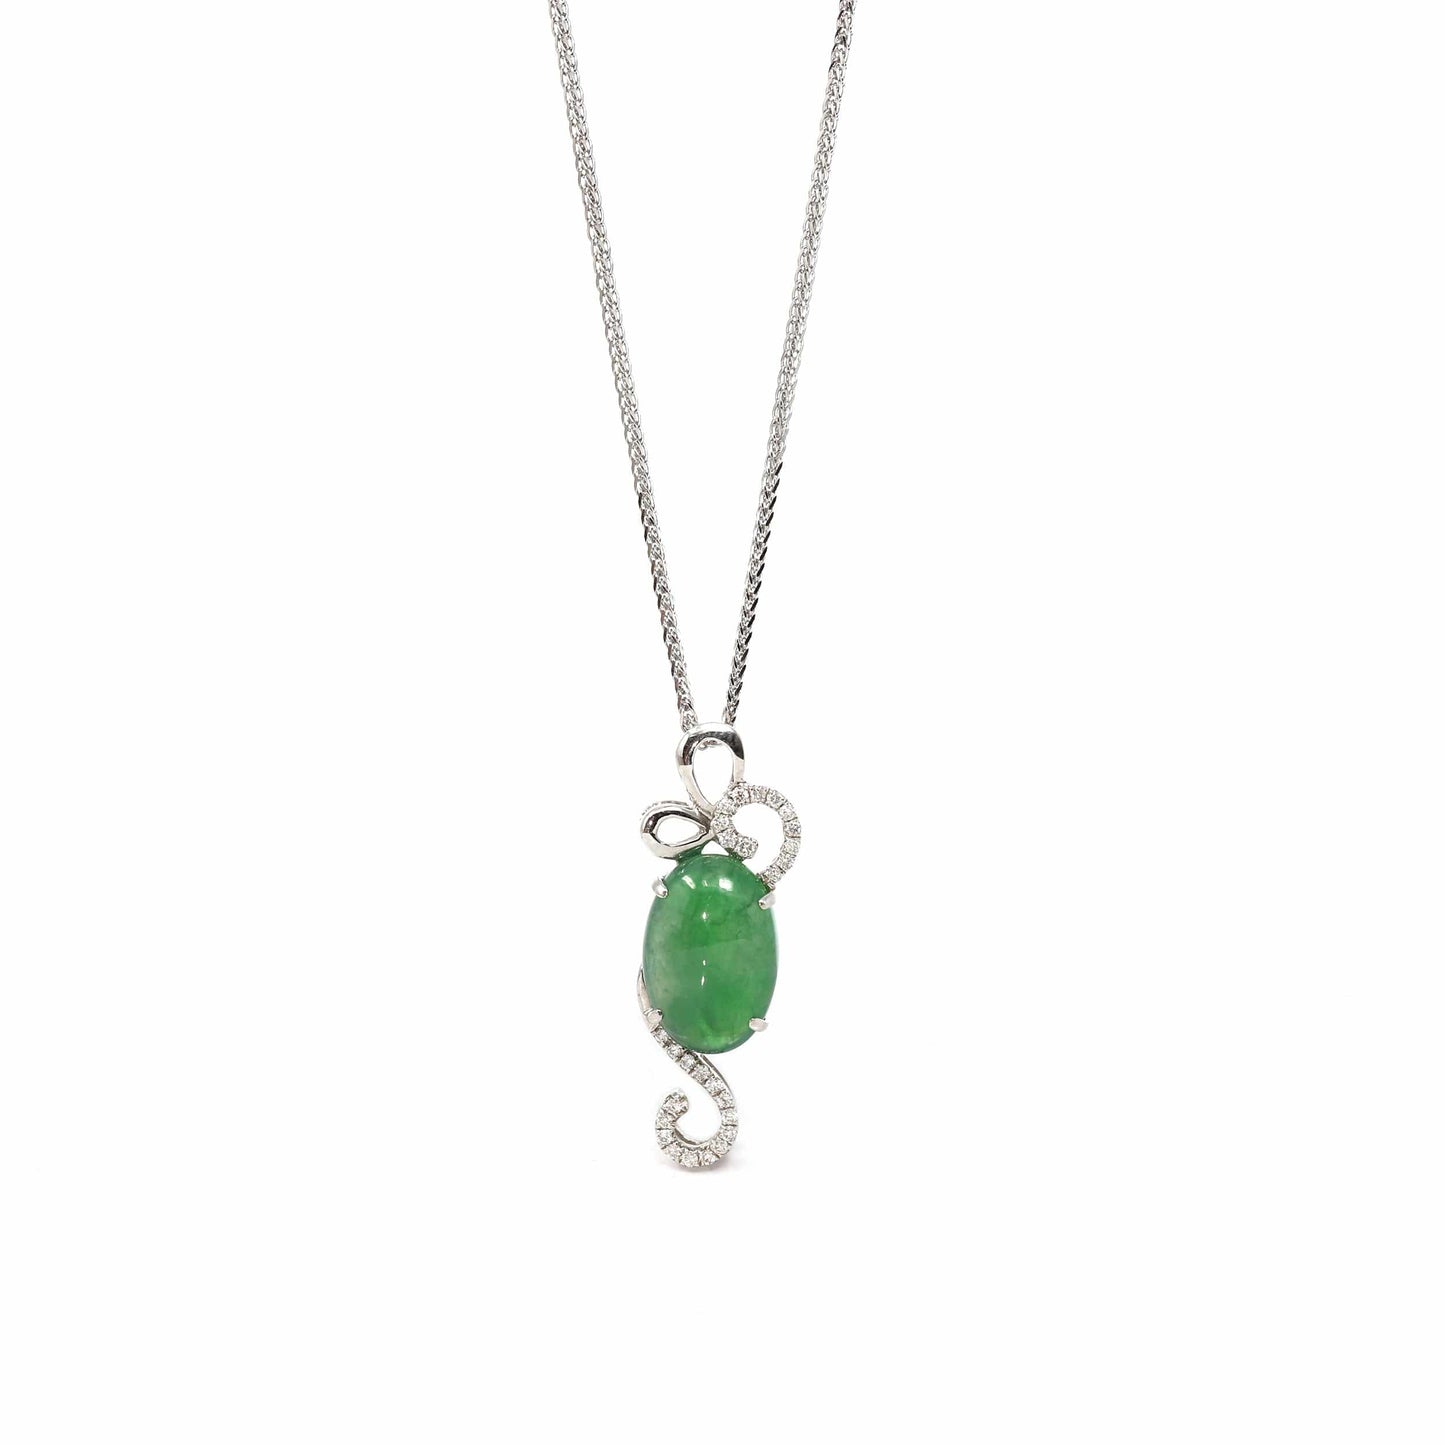 RealJade® Co. 18k Gold Jadeite Necklace 18K White Gold Oval Imperial Jadeite Jade Cabochon Necklace with Diamonds